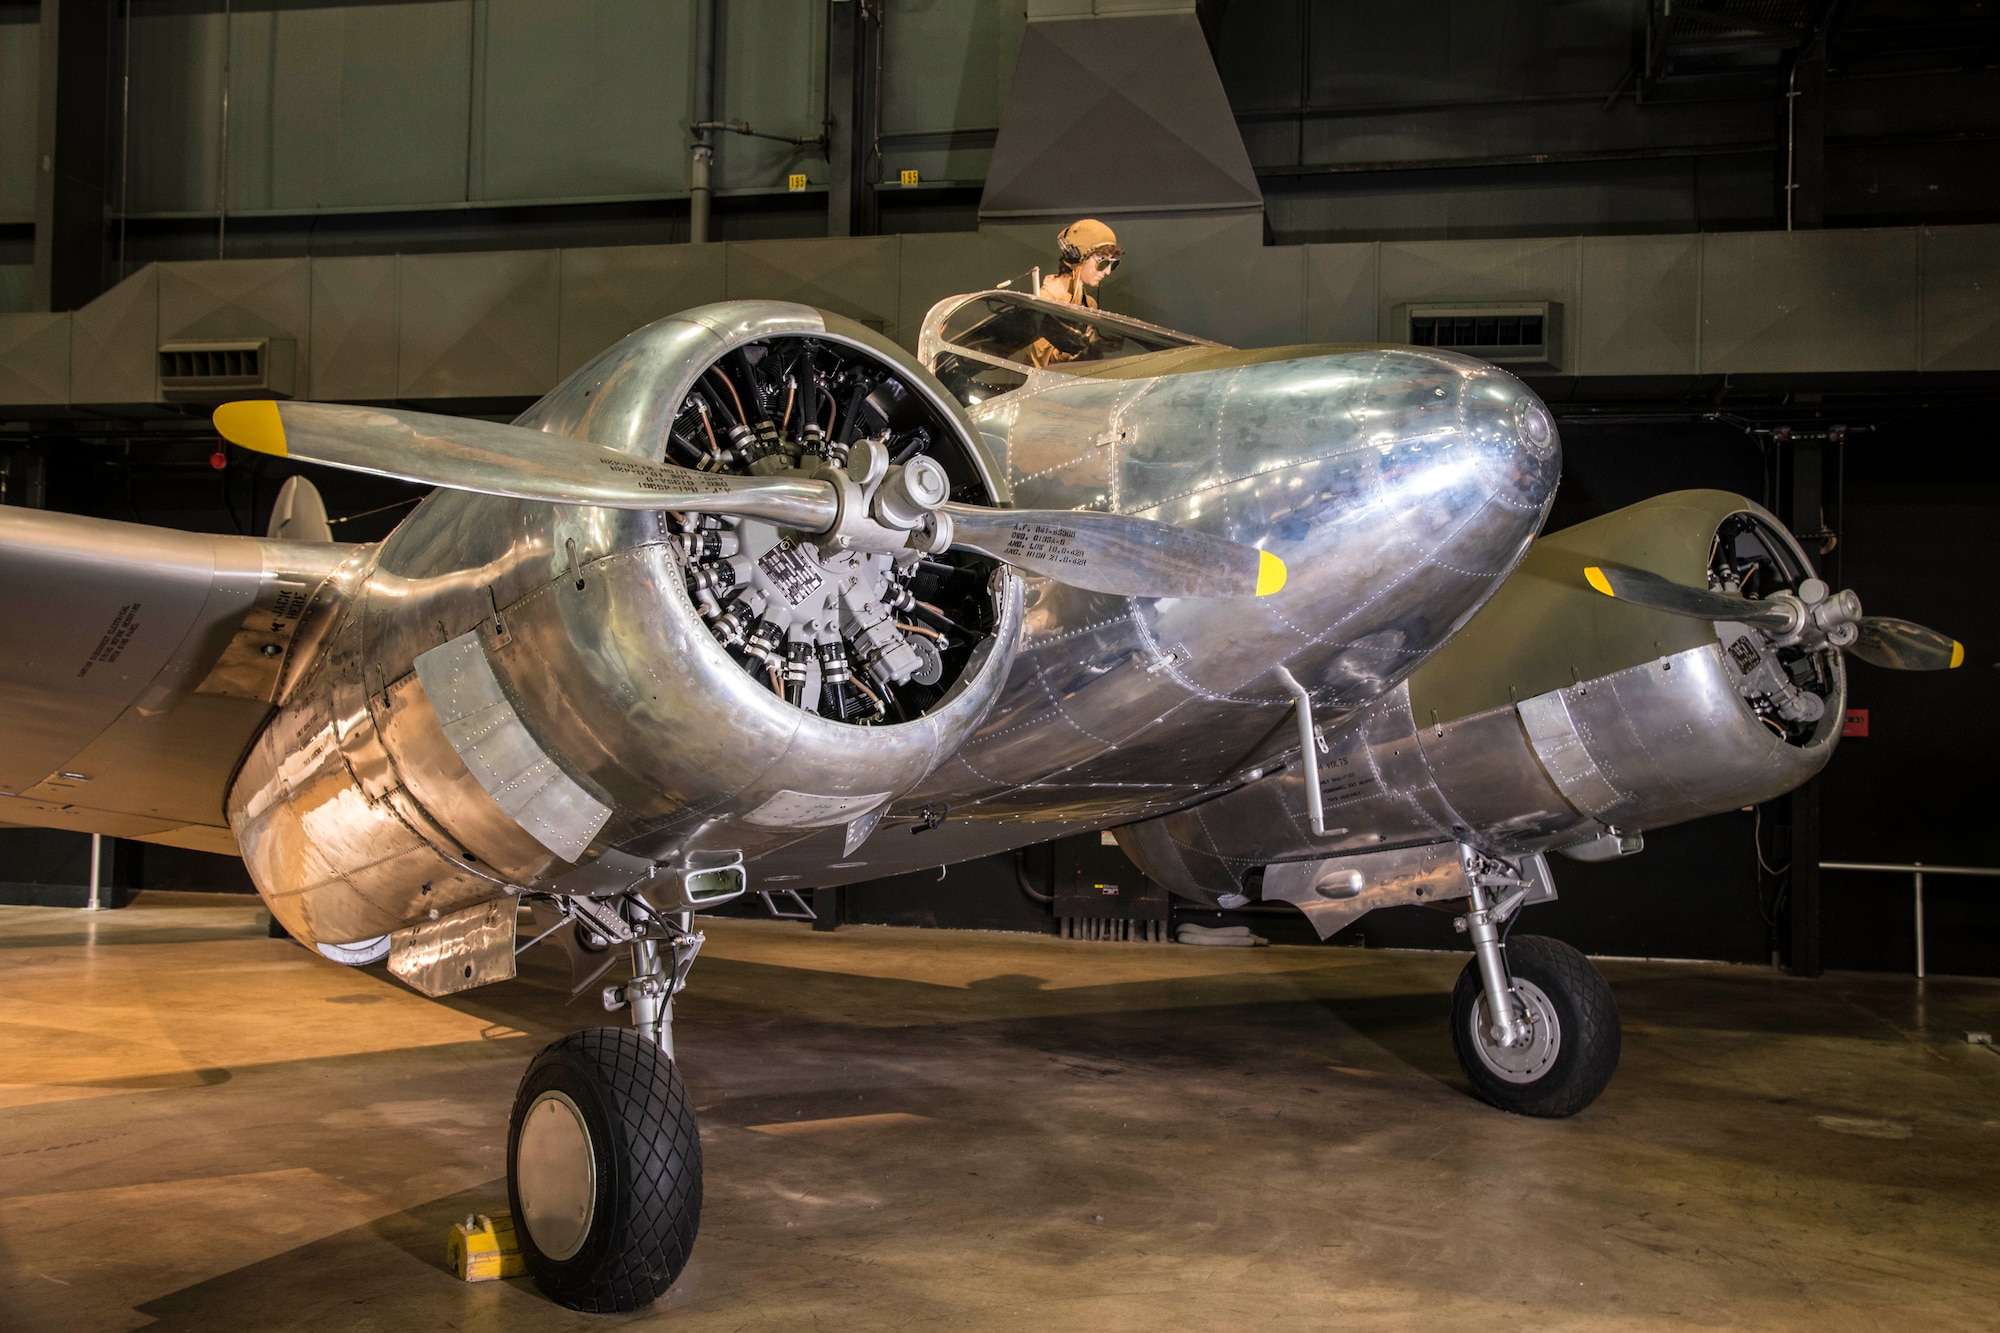 DAYTON, Ohio -- Beech AT-10 Wichita on display in the WWII Gallery at the National Museum of the United States Air Force. (U.S. Air Force photo by Ken LaRock)
